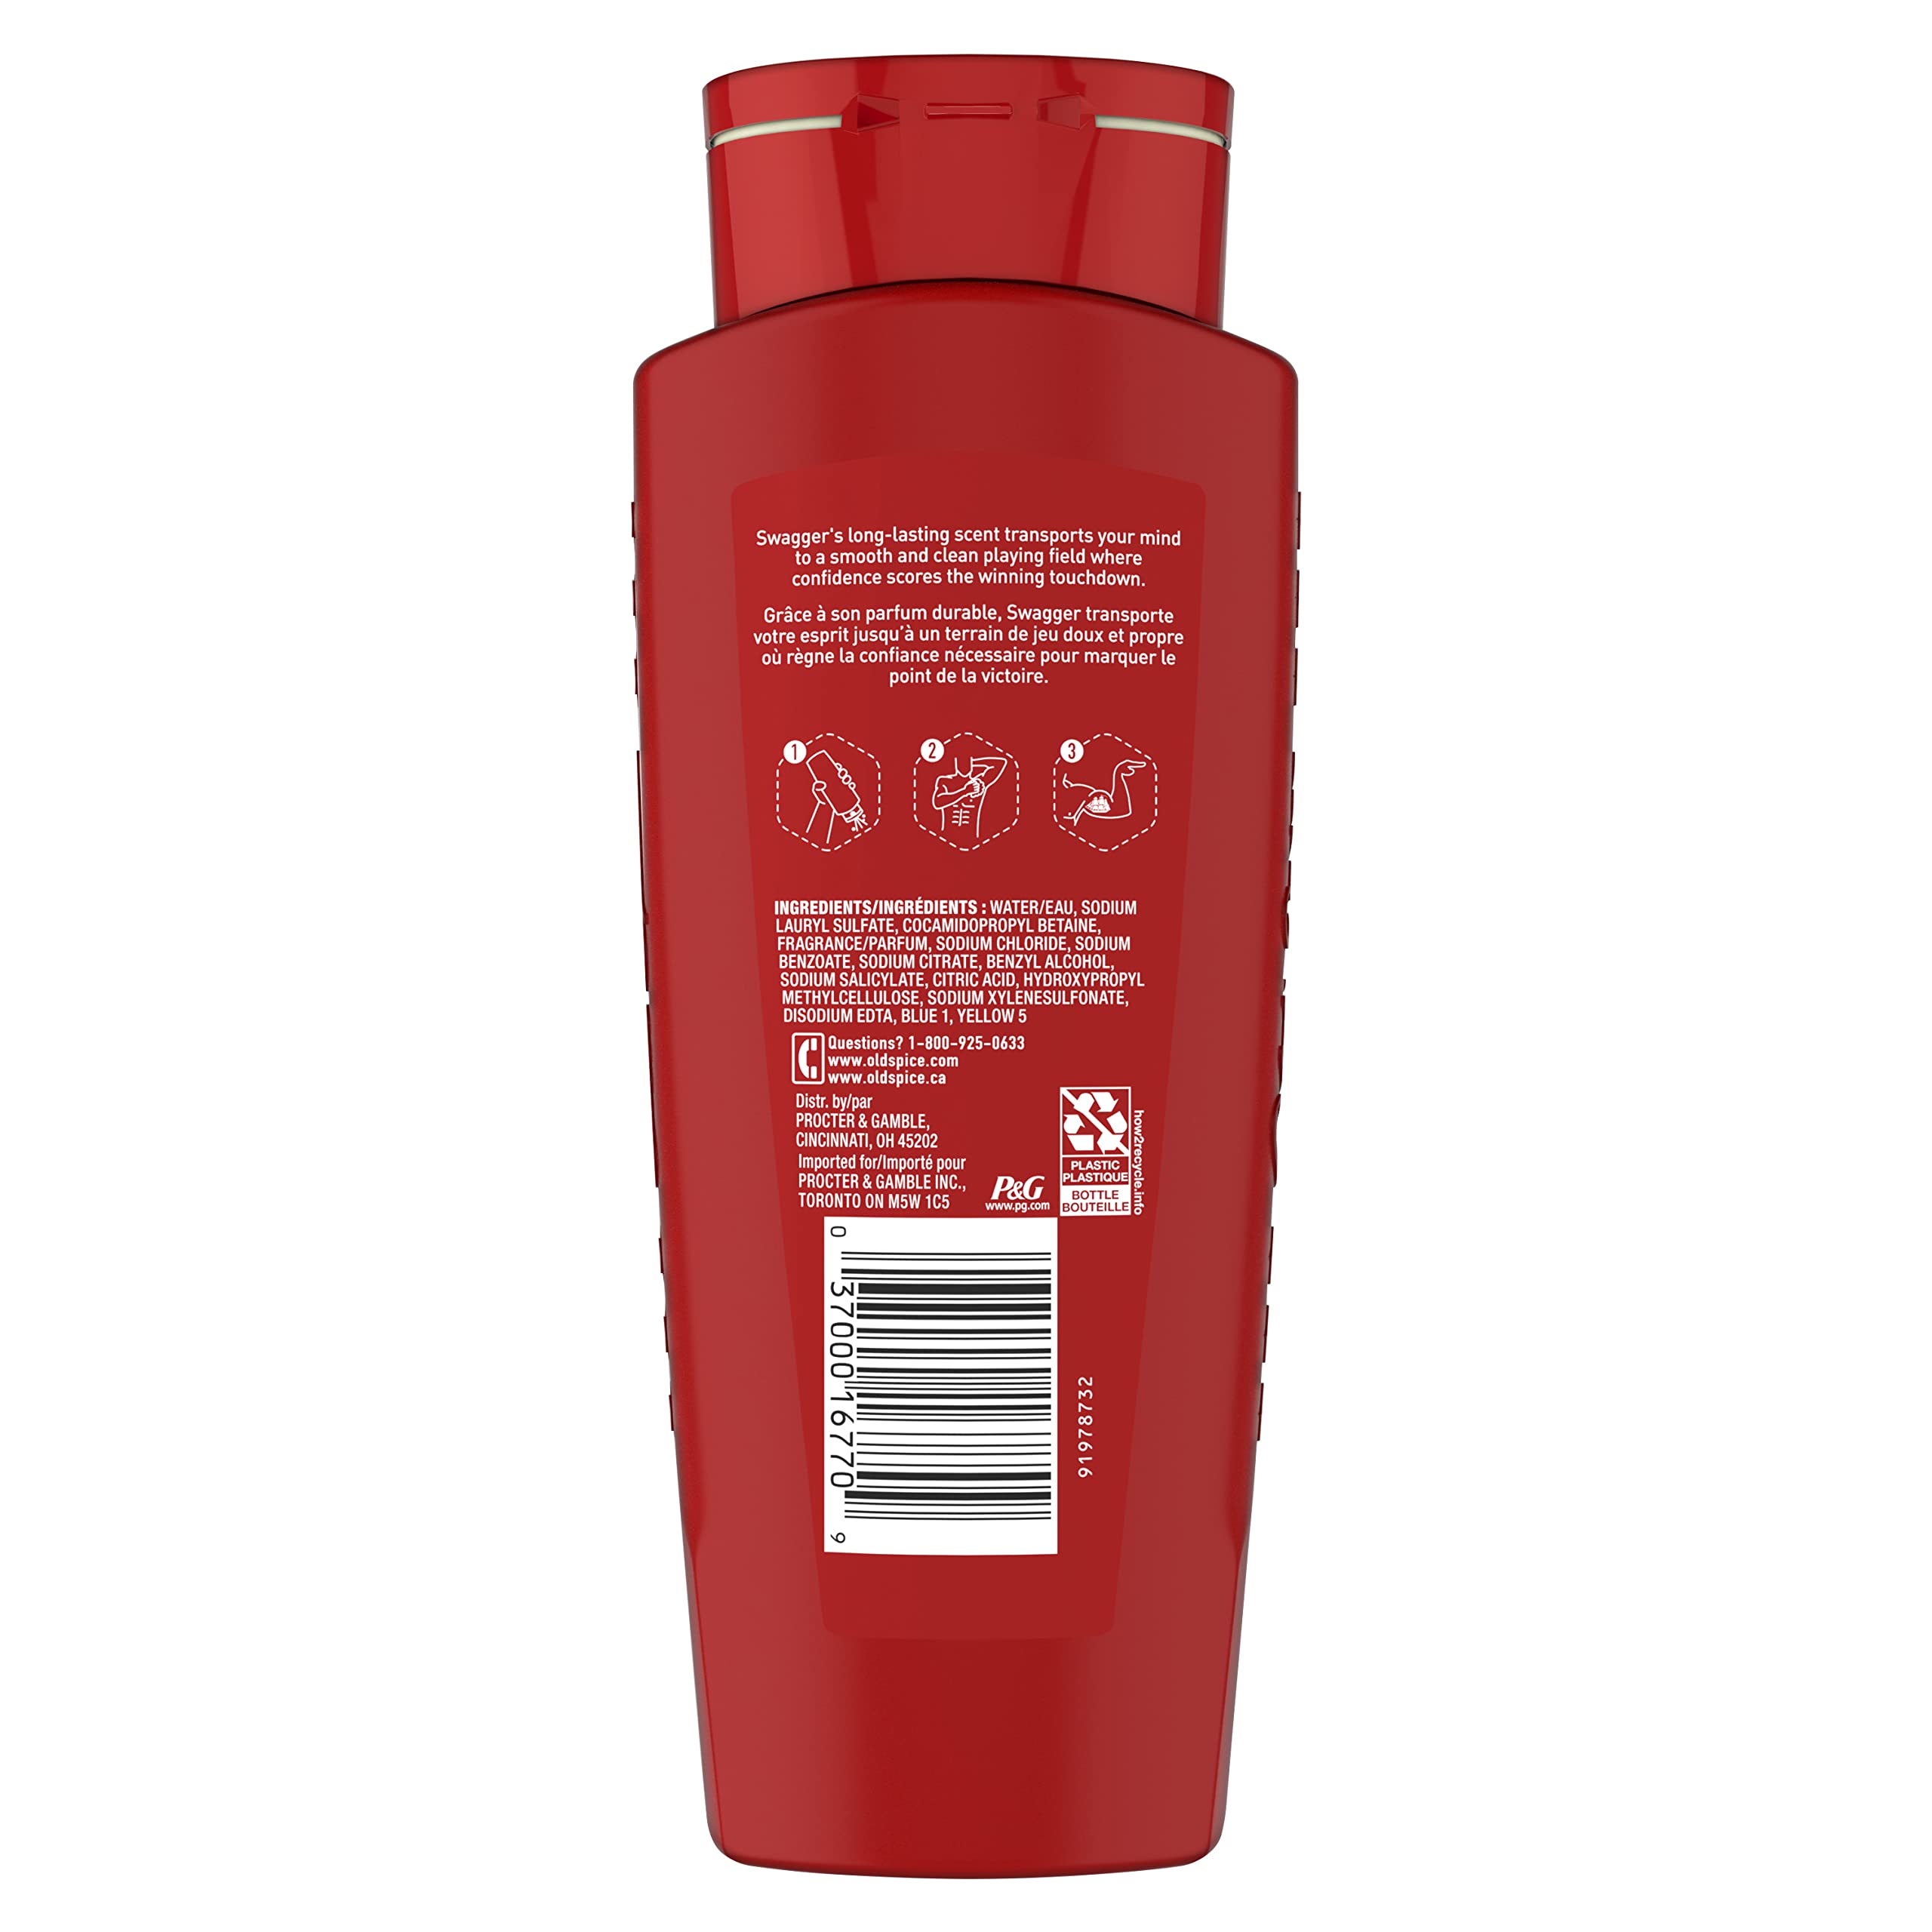 Old Spice Men's Body Wash, Swagger Scent, Red Collection 16 Fl Oz (Pack of 4)